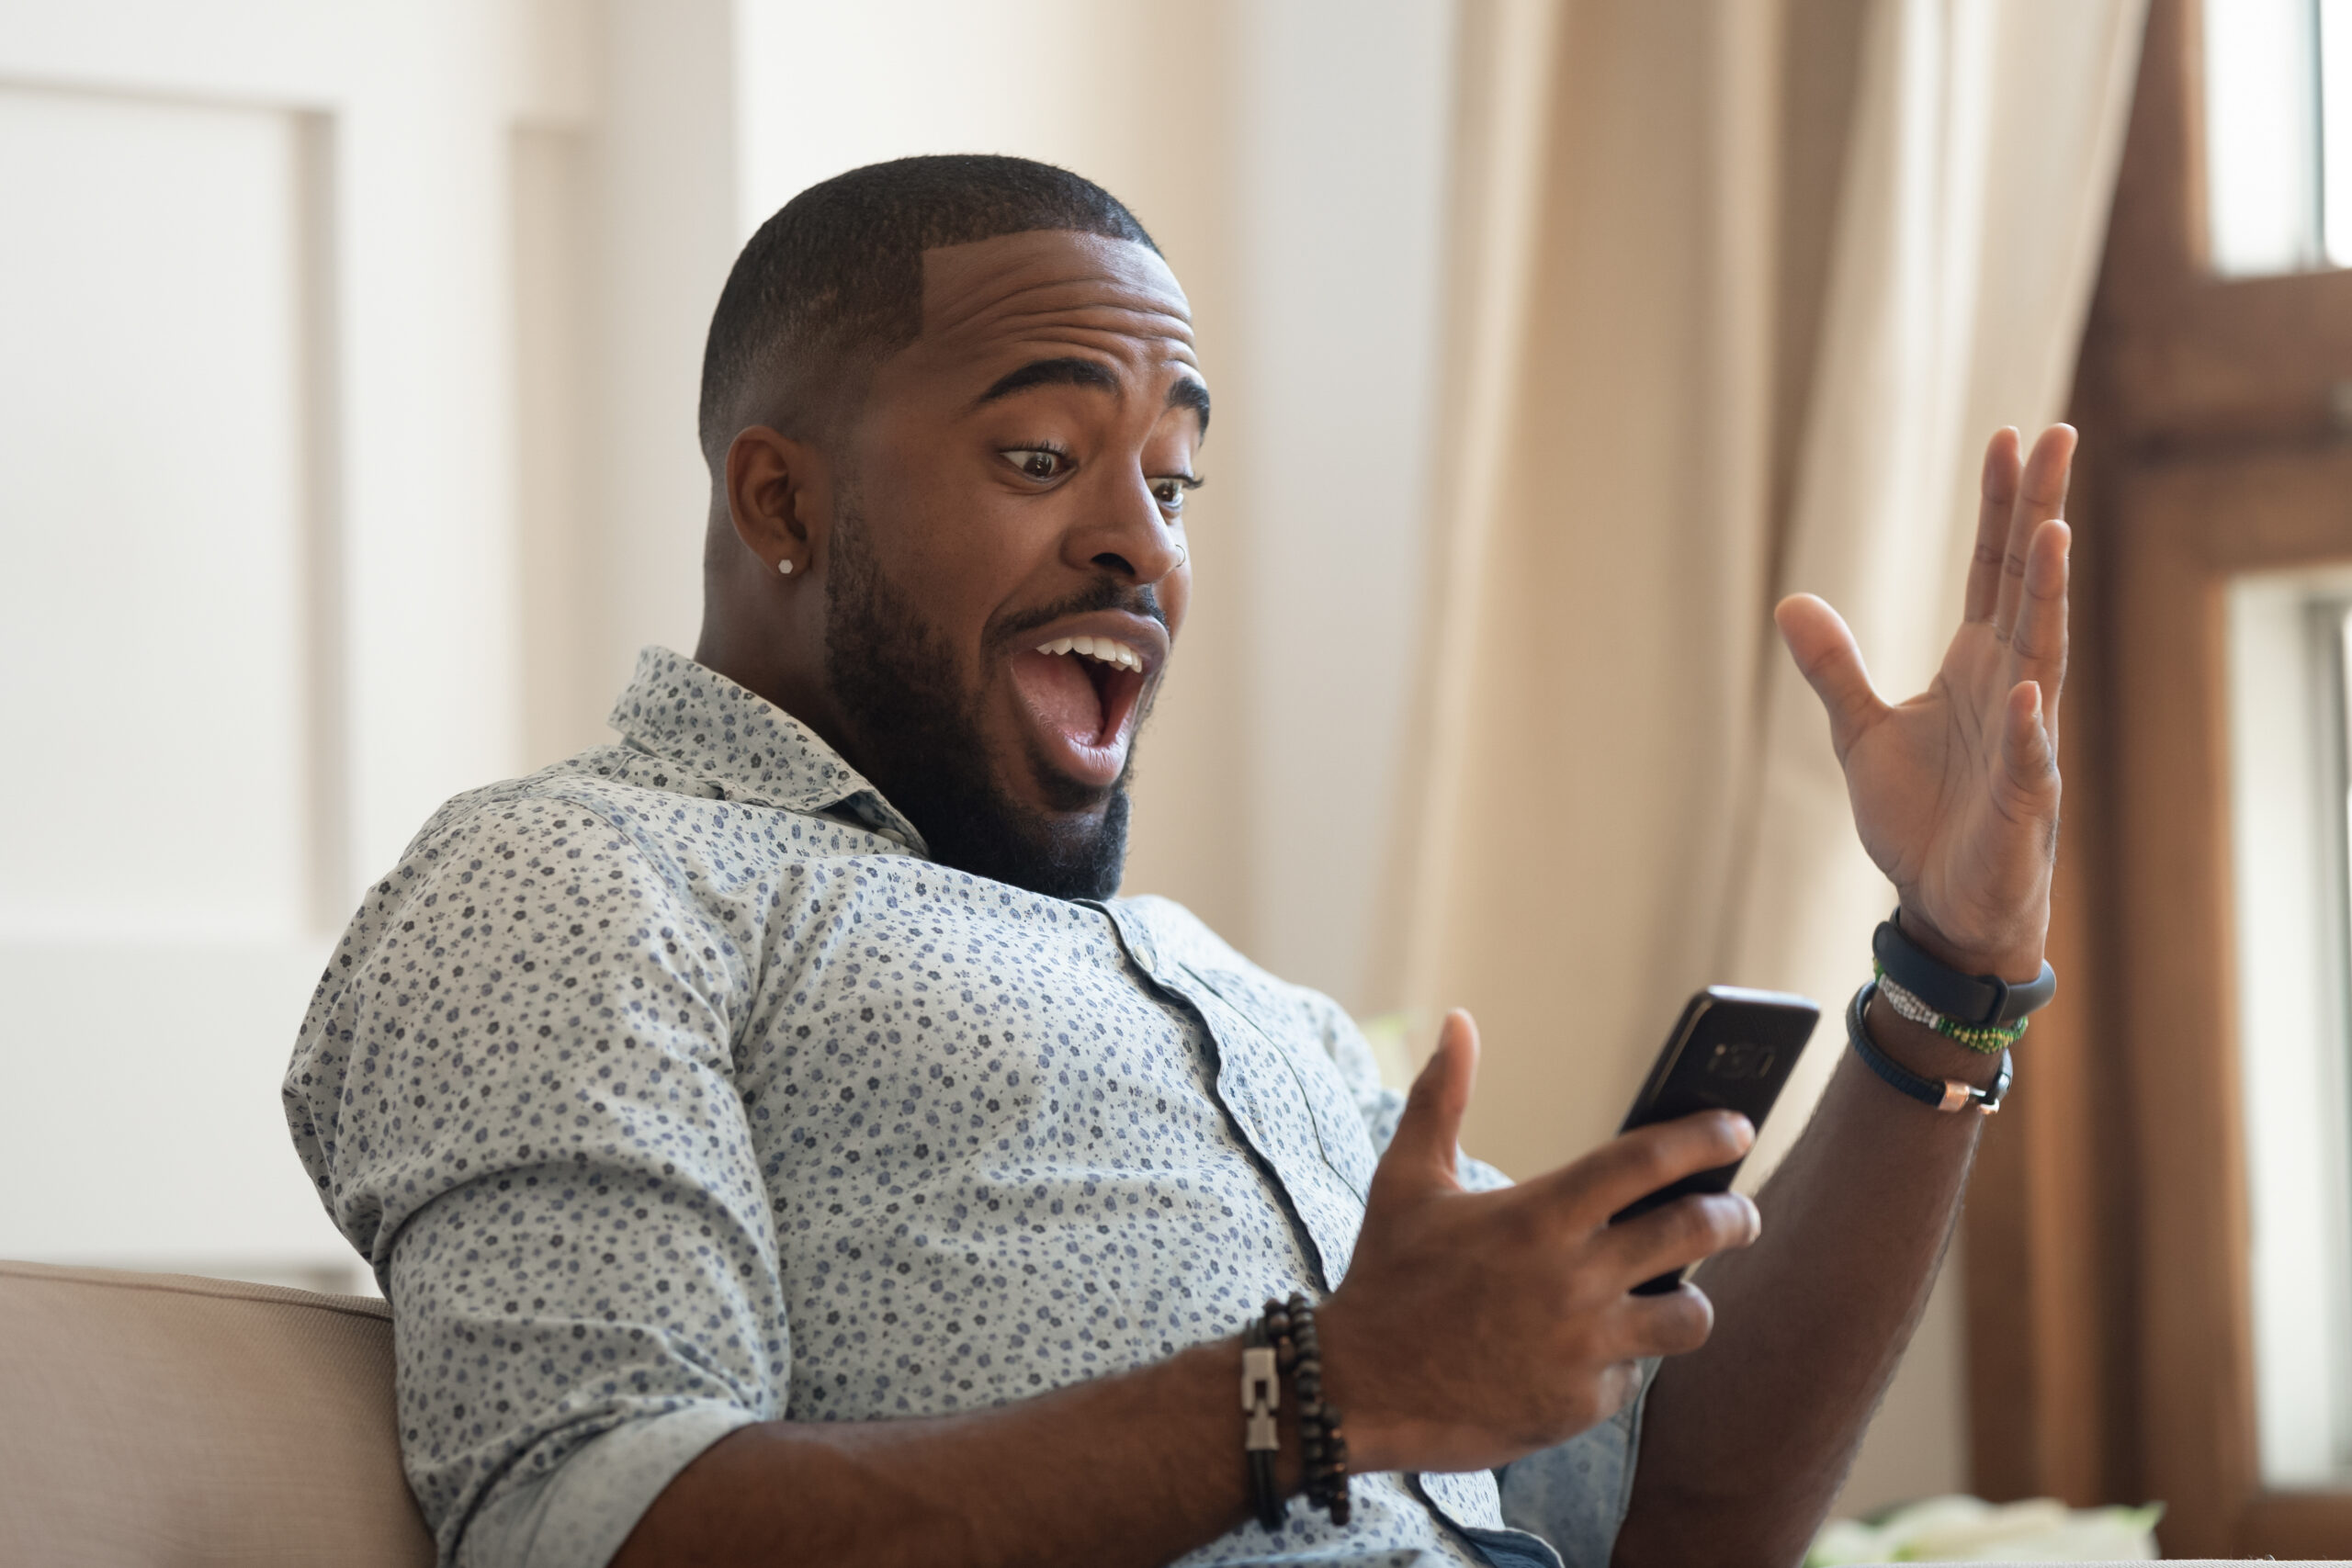 Surprised,Happy,African,Man,Holding,Phone,Looking,At,Cellphone,Read